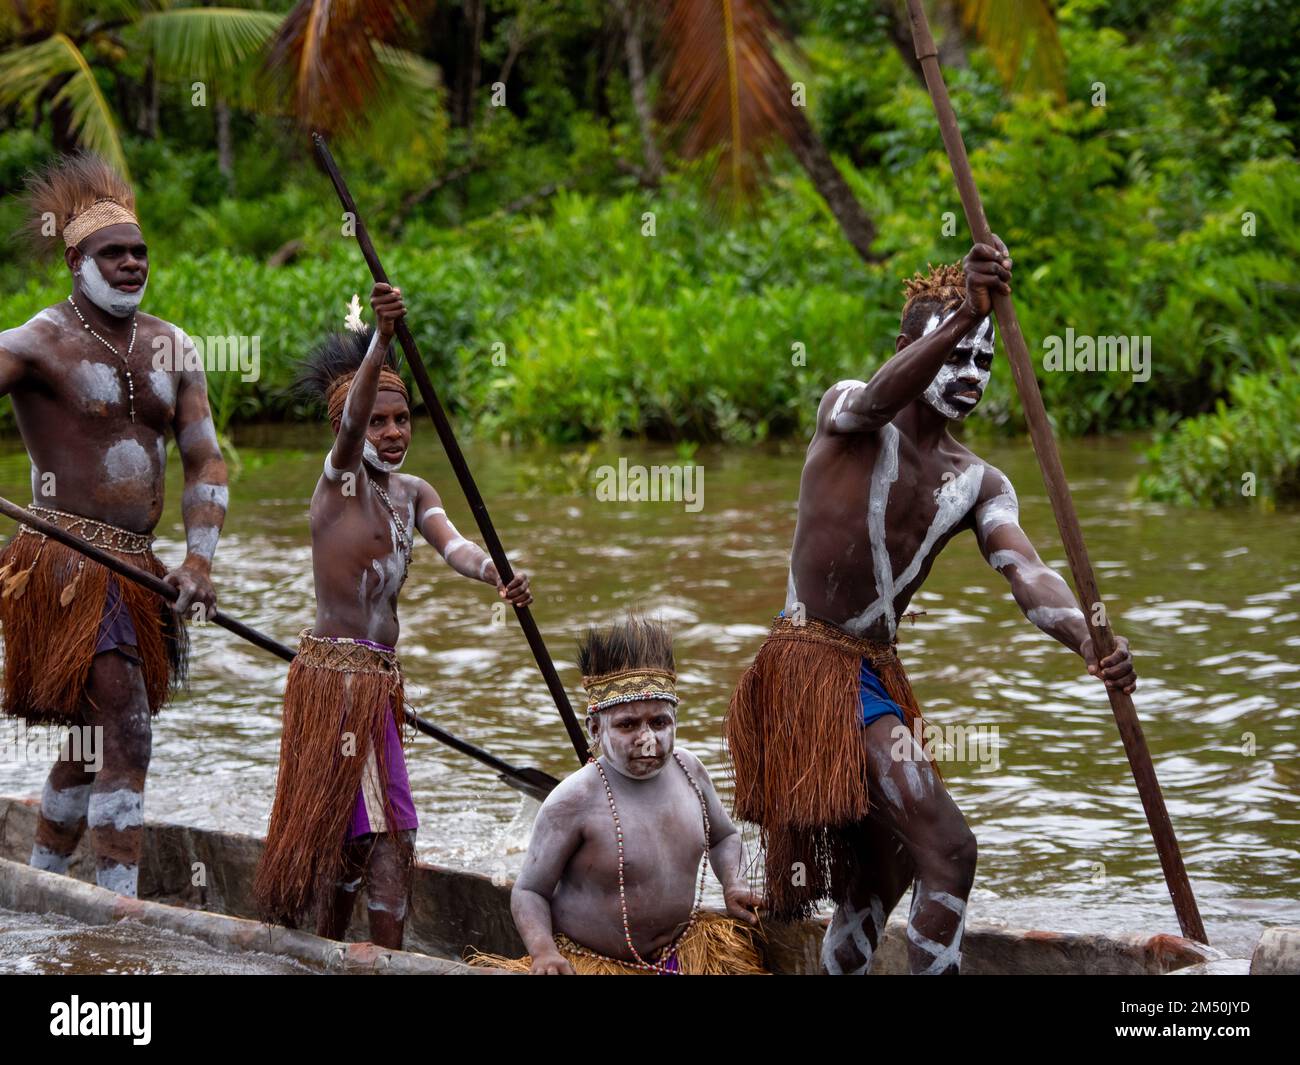 Canoe welcome to the Pem Village in the Asmat region of South Papua, Indonesia Stock Photo